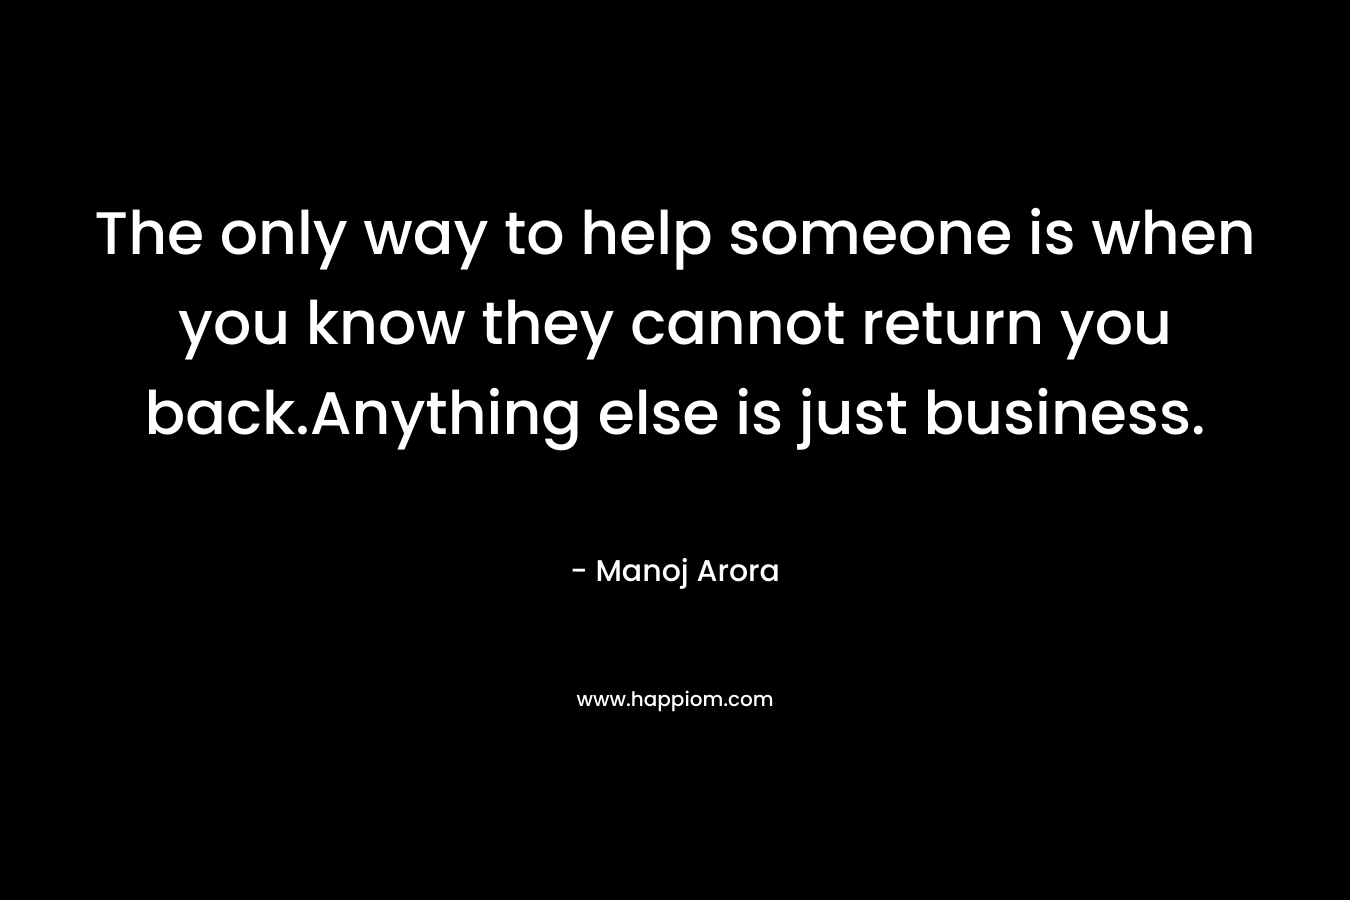 The only way to help someone is when you know they cannot return you back.Anything else is just business.